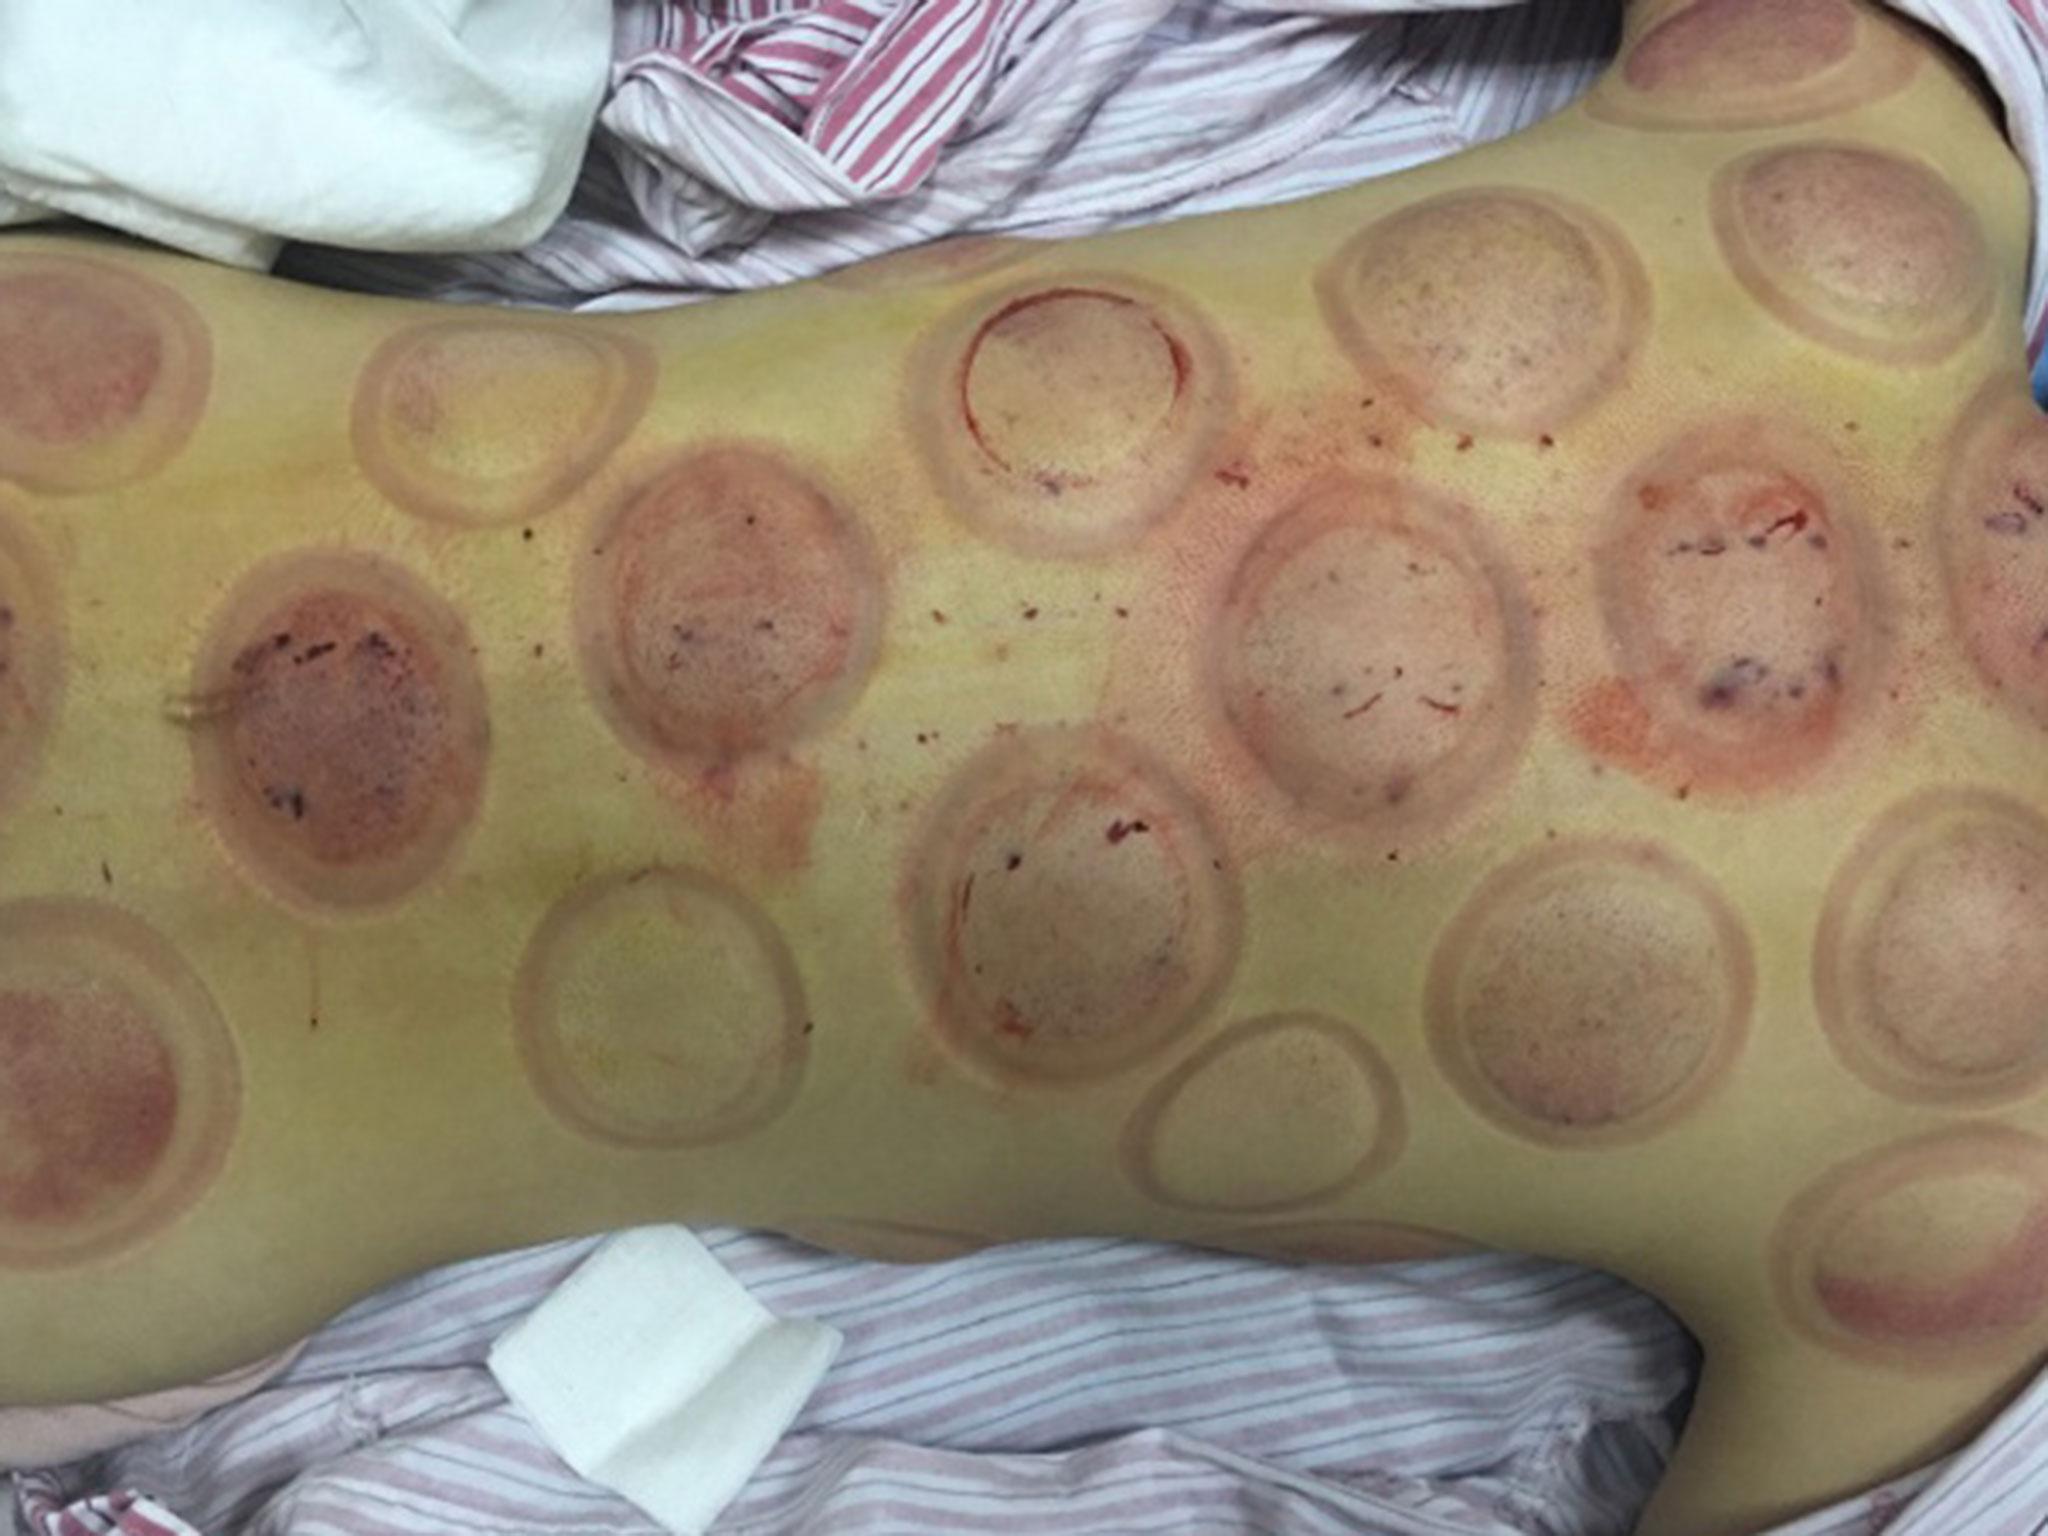 Pictures from Xu Ting's Sina Weibo social media account show the aftermath of a cupping session